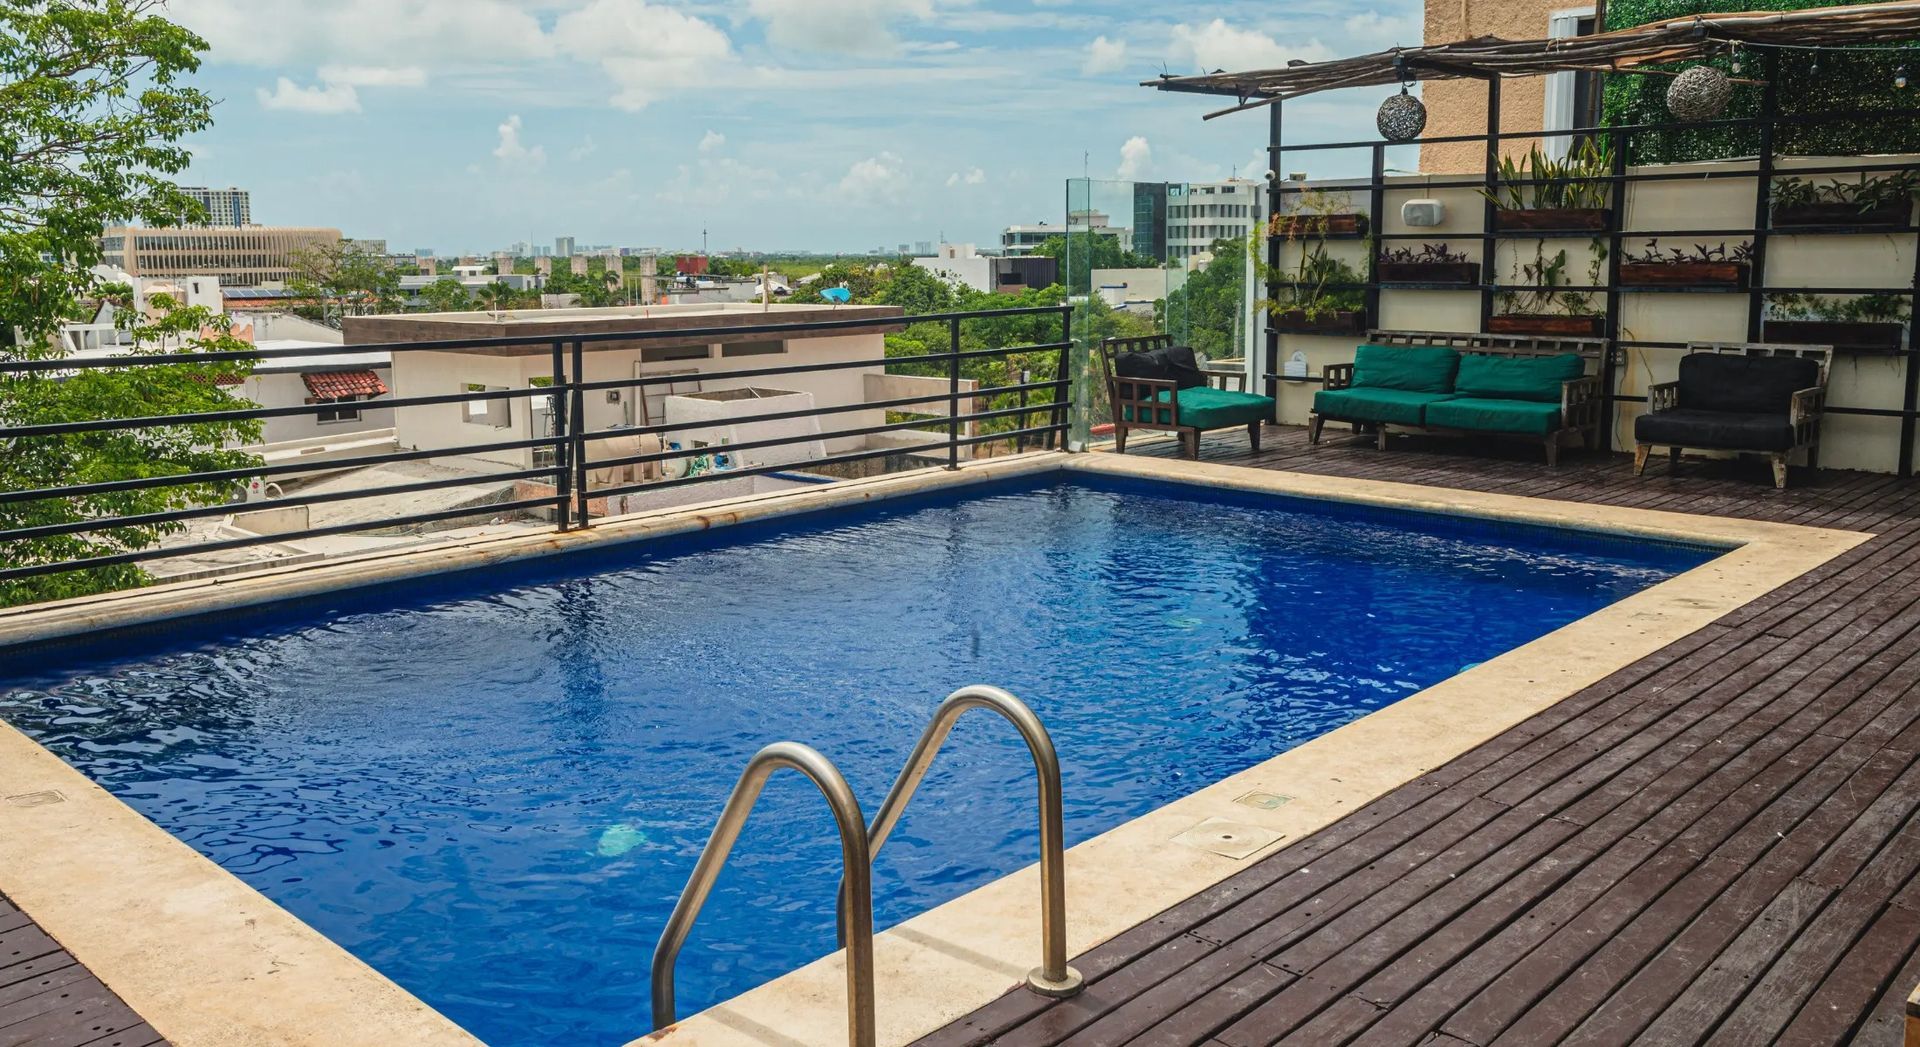 A large swimming pool is sitting on top of a wooden deck in nomads the best hostel in cancun downtown.